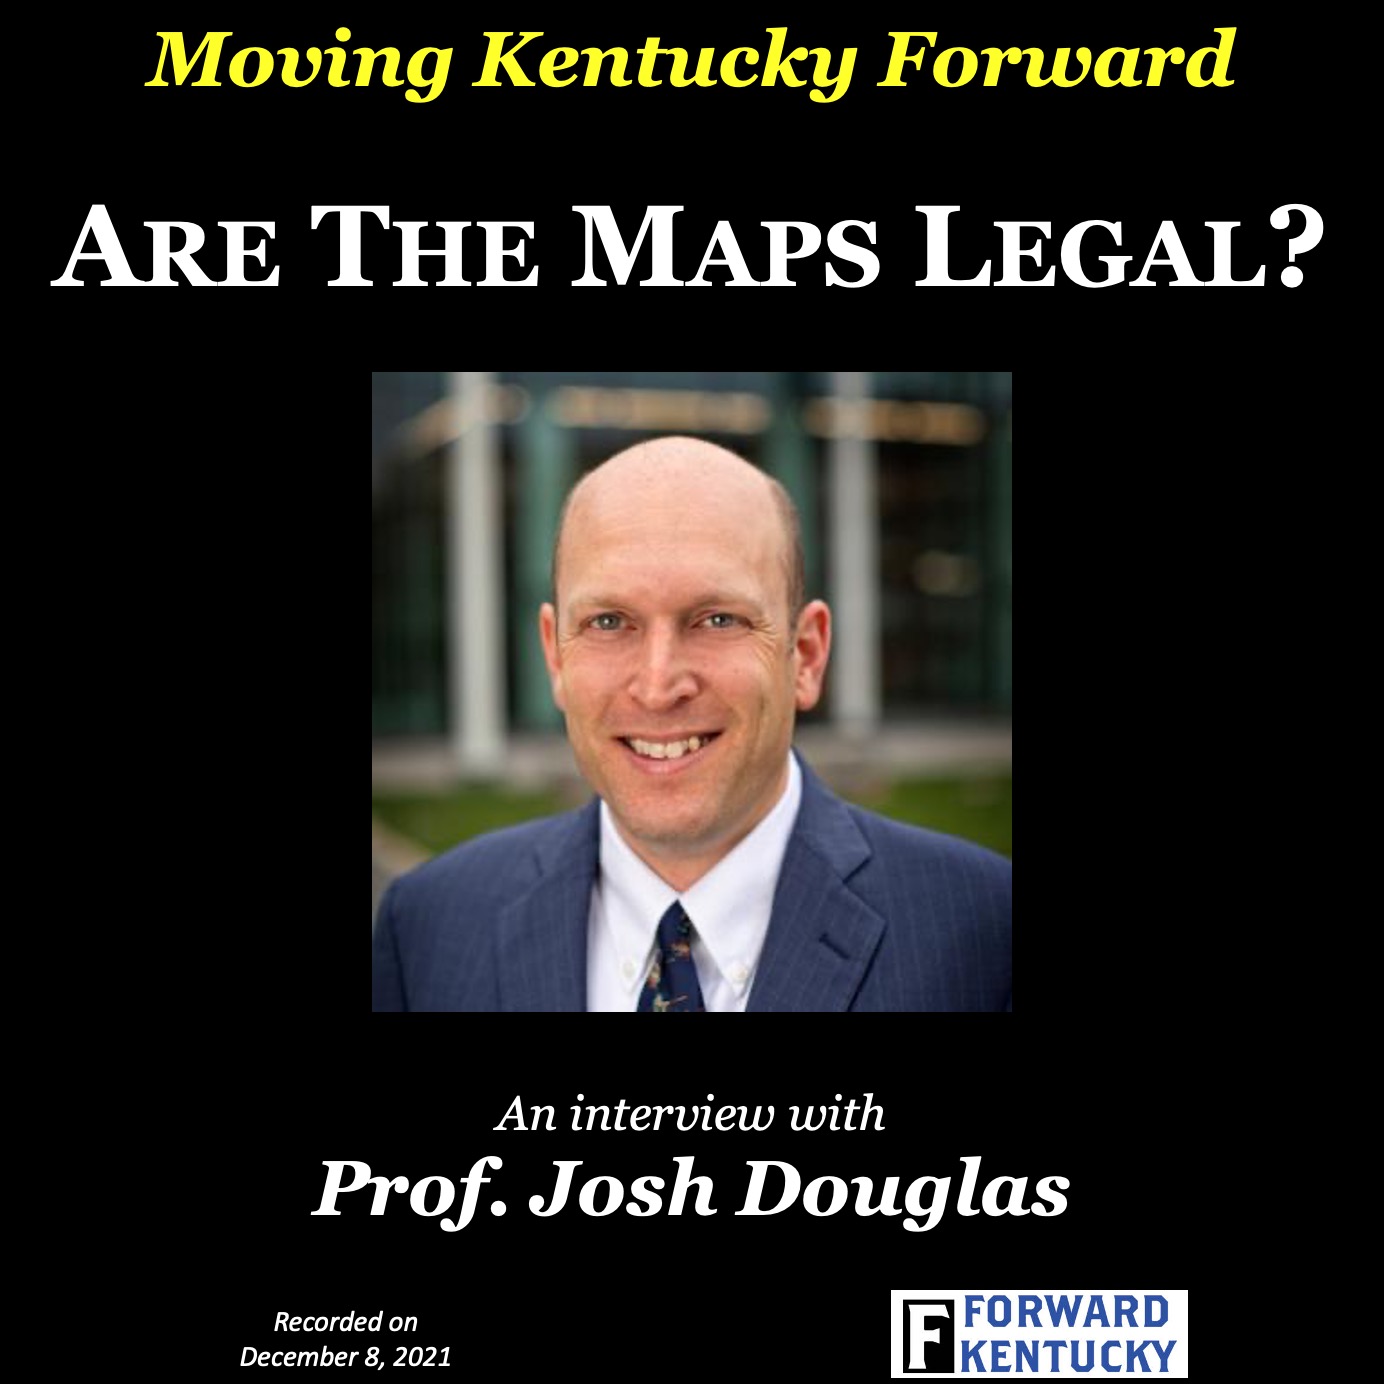 Are the Maps Legal? An interview with Josh Douglas